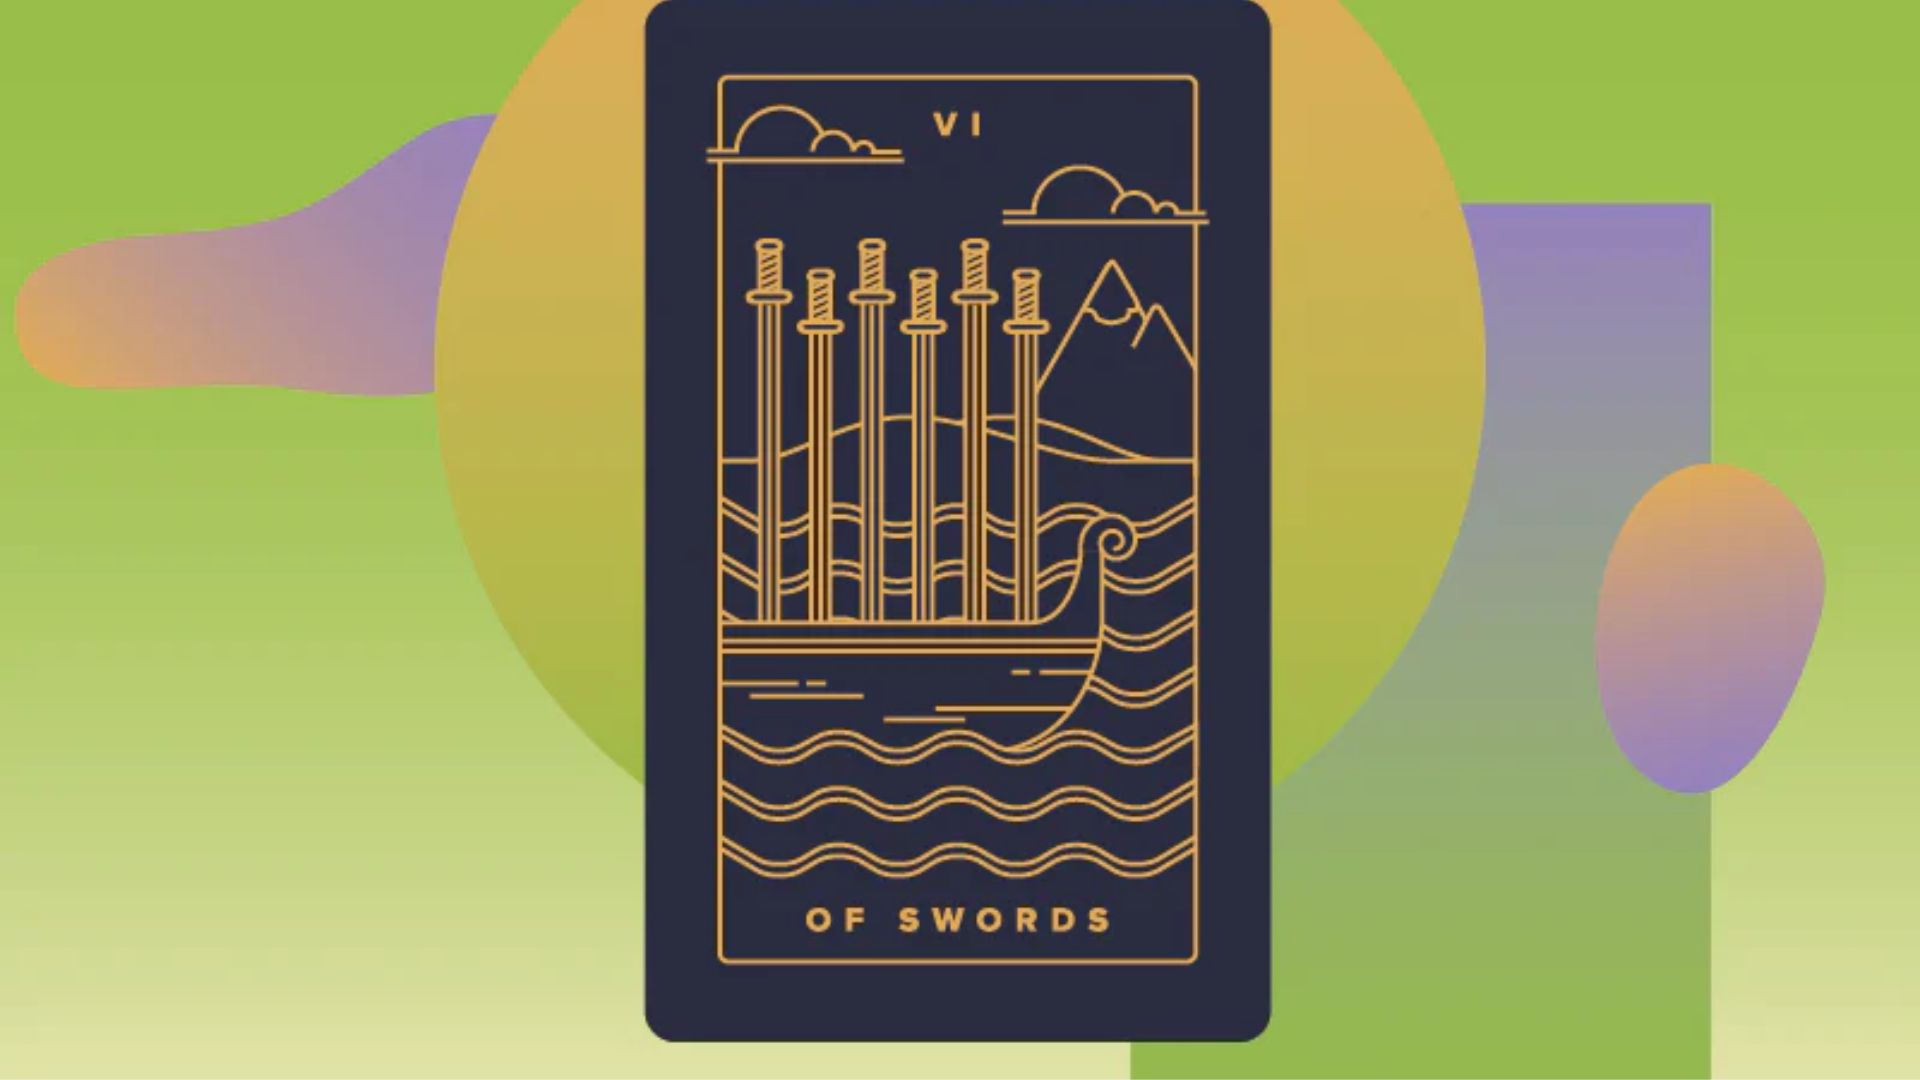 6 Of Swords - Resistance And Reflection